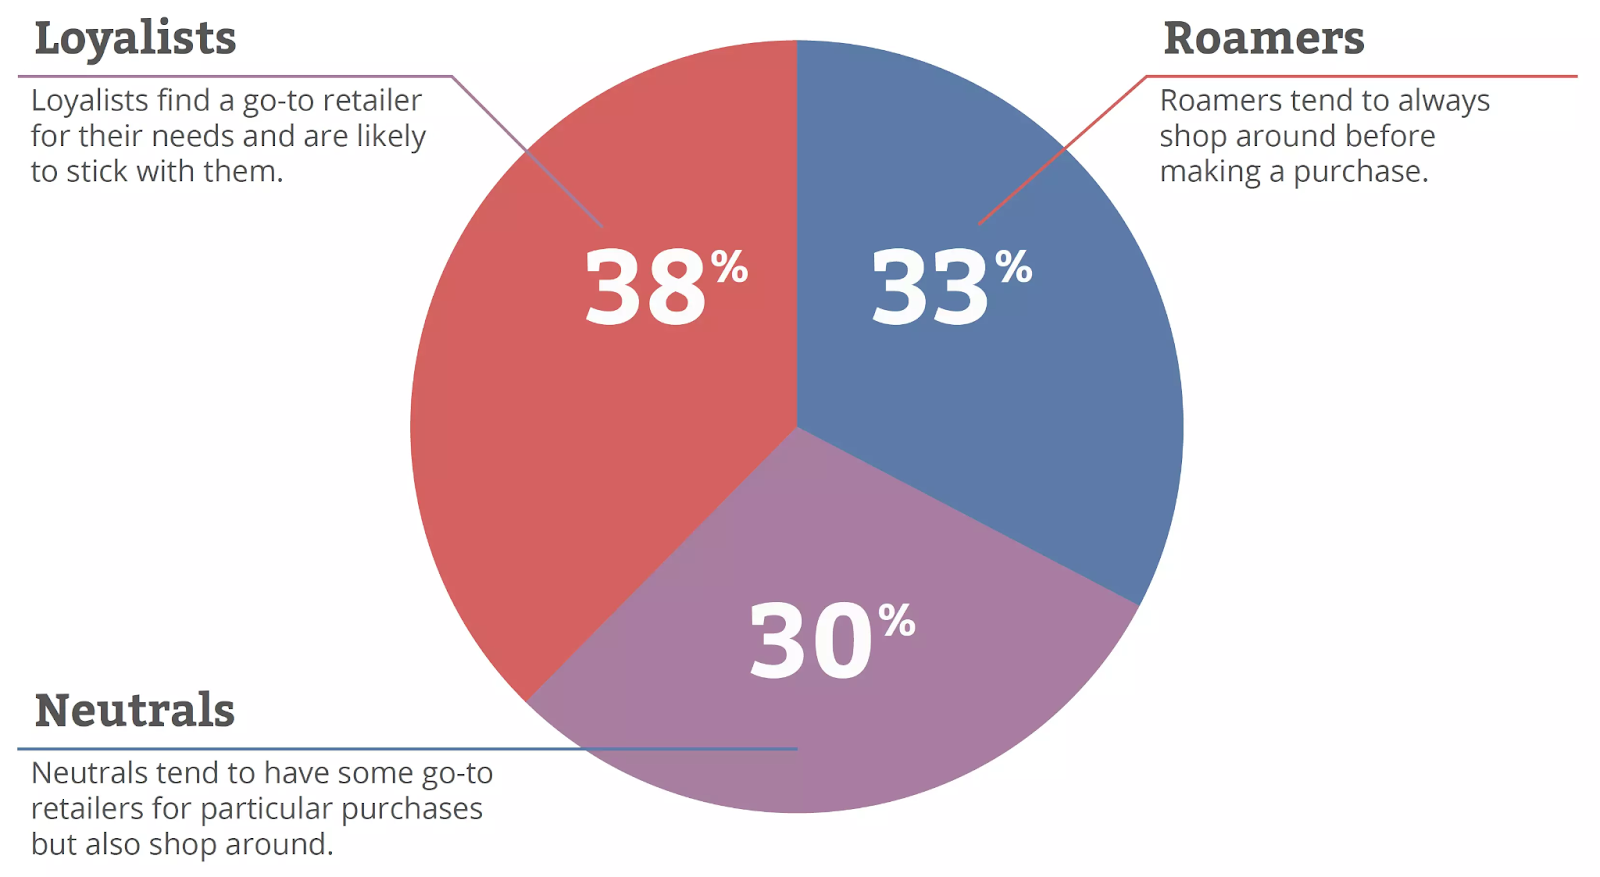 A pie chart split into three sections showing how often consumers change shopping providers. Loyalists: 38% - the largest section, loyalists tend to stick with one retailer. Roamers: 33% - tend to shop around before making a purchase. Neutrals: 30% - a mix of both. 